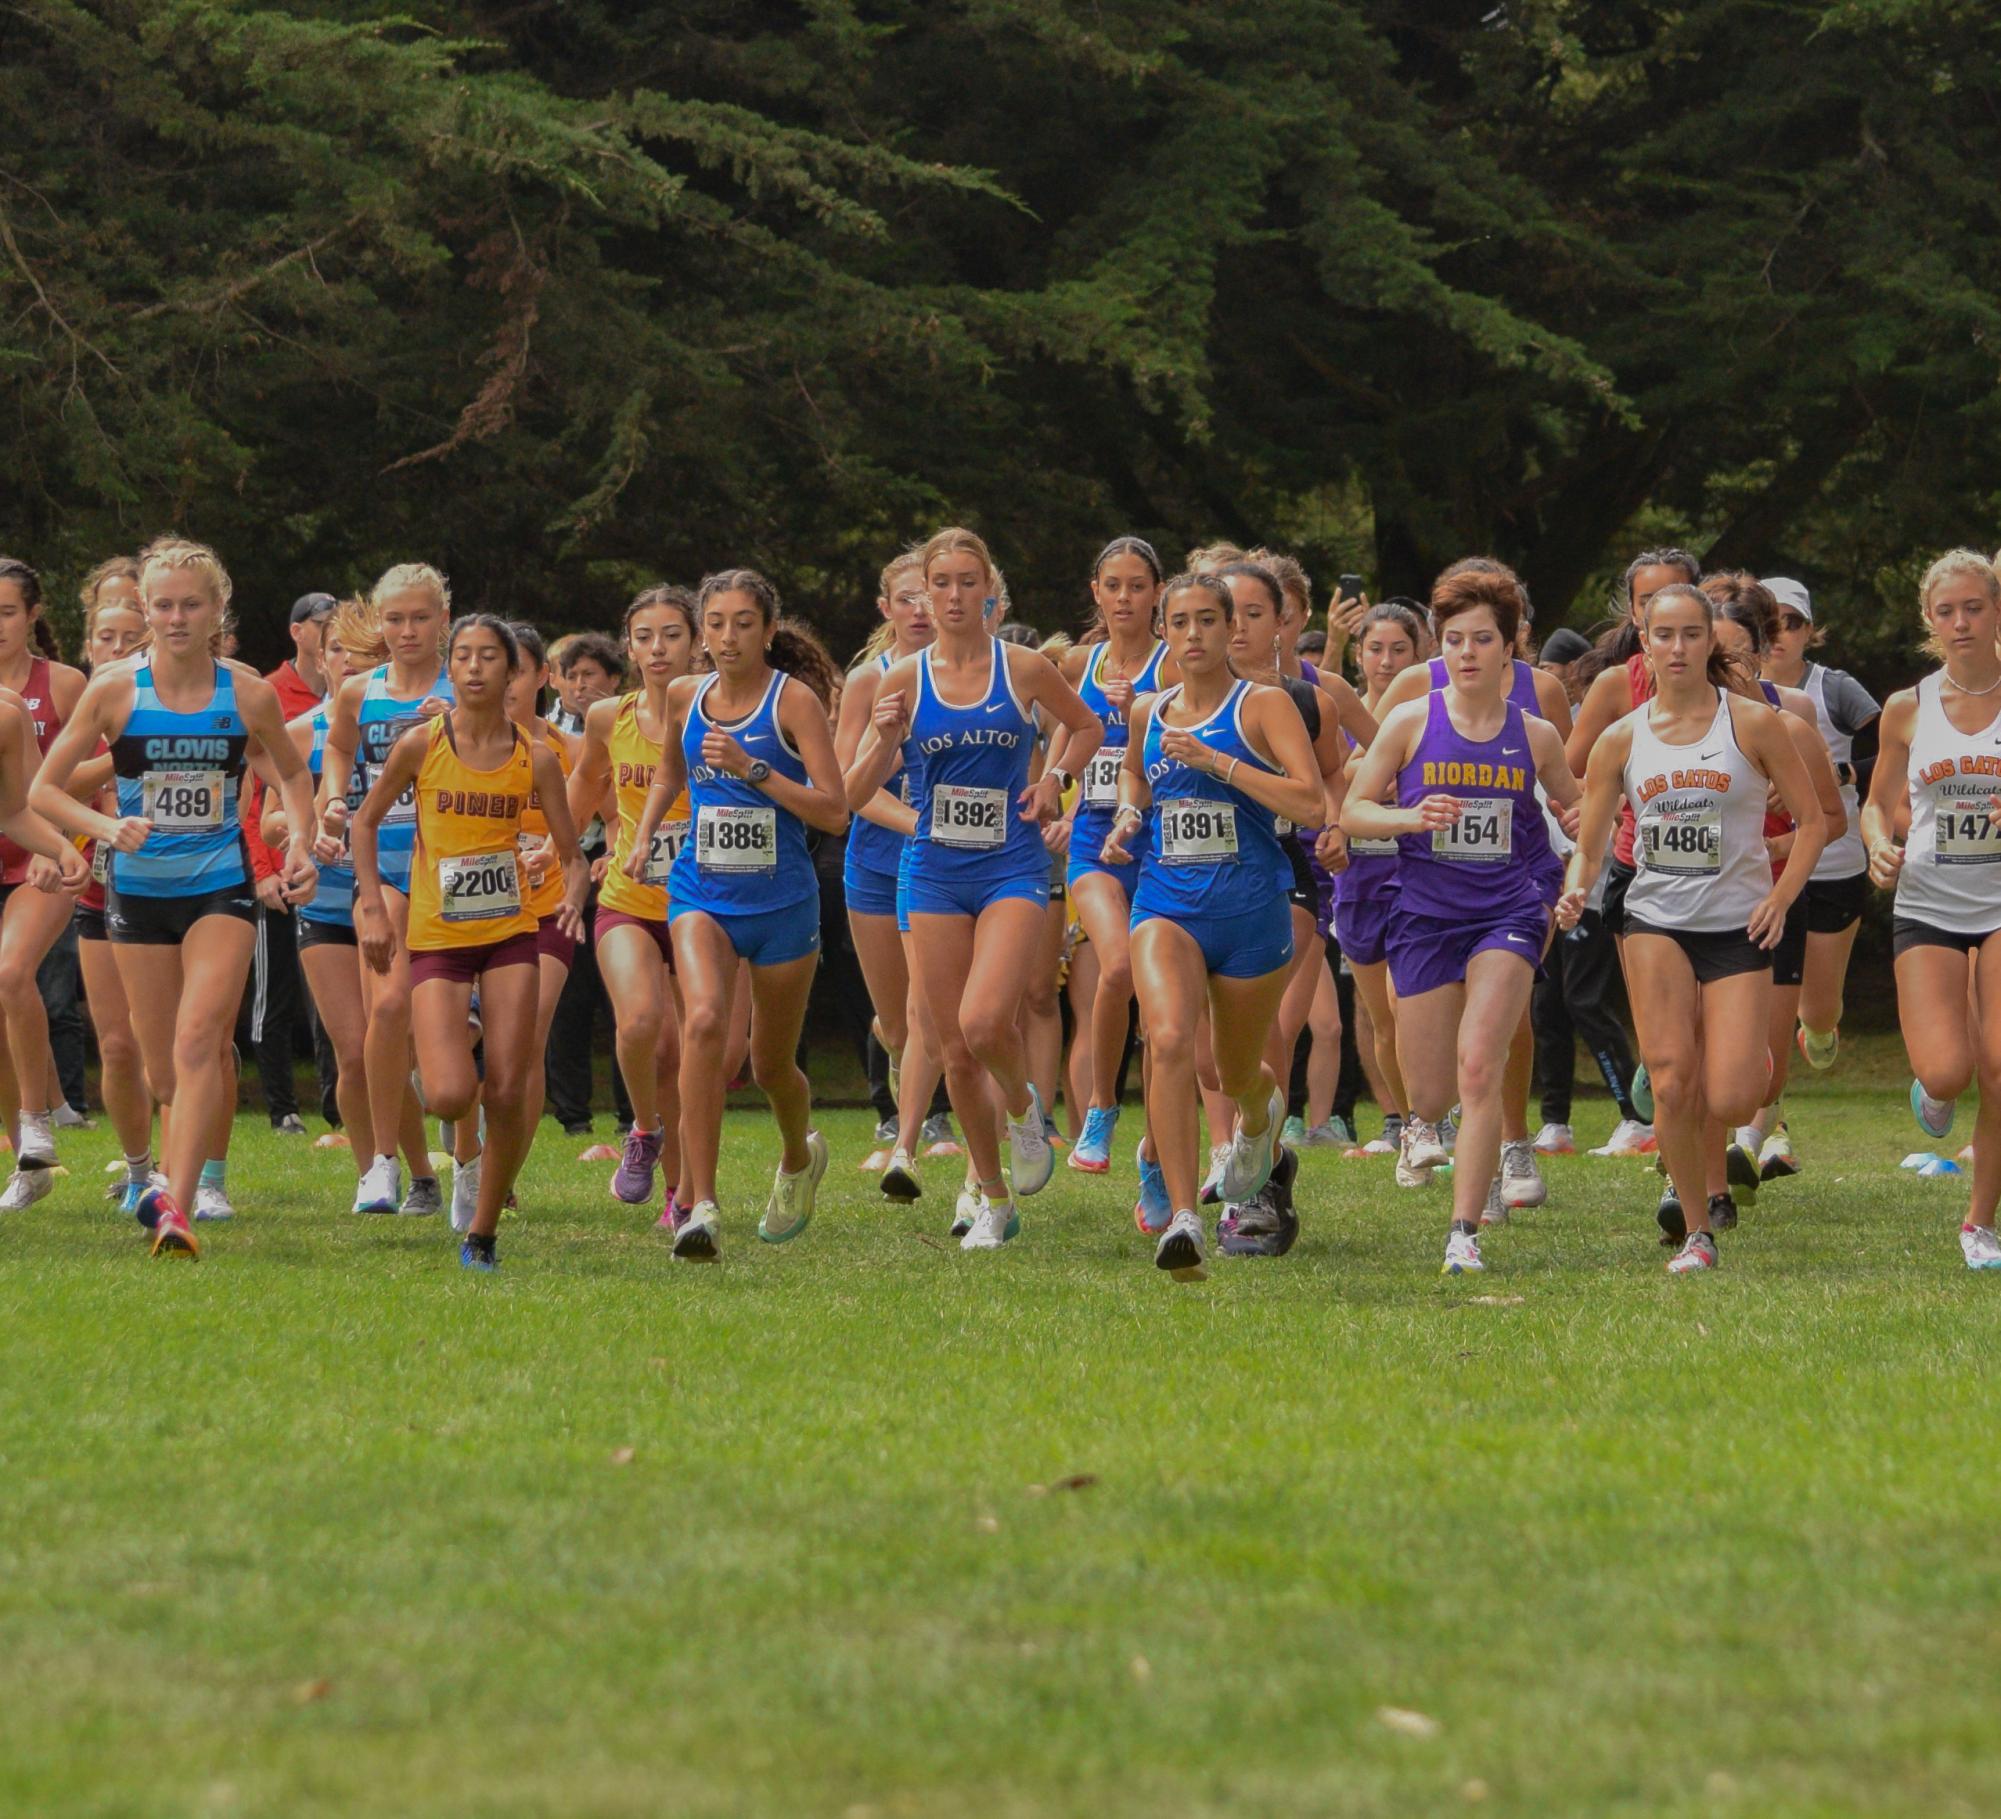 Cross country takes to a flying start at Lowell Invitational